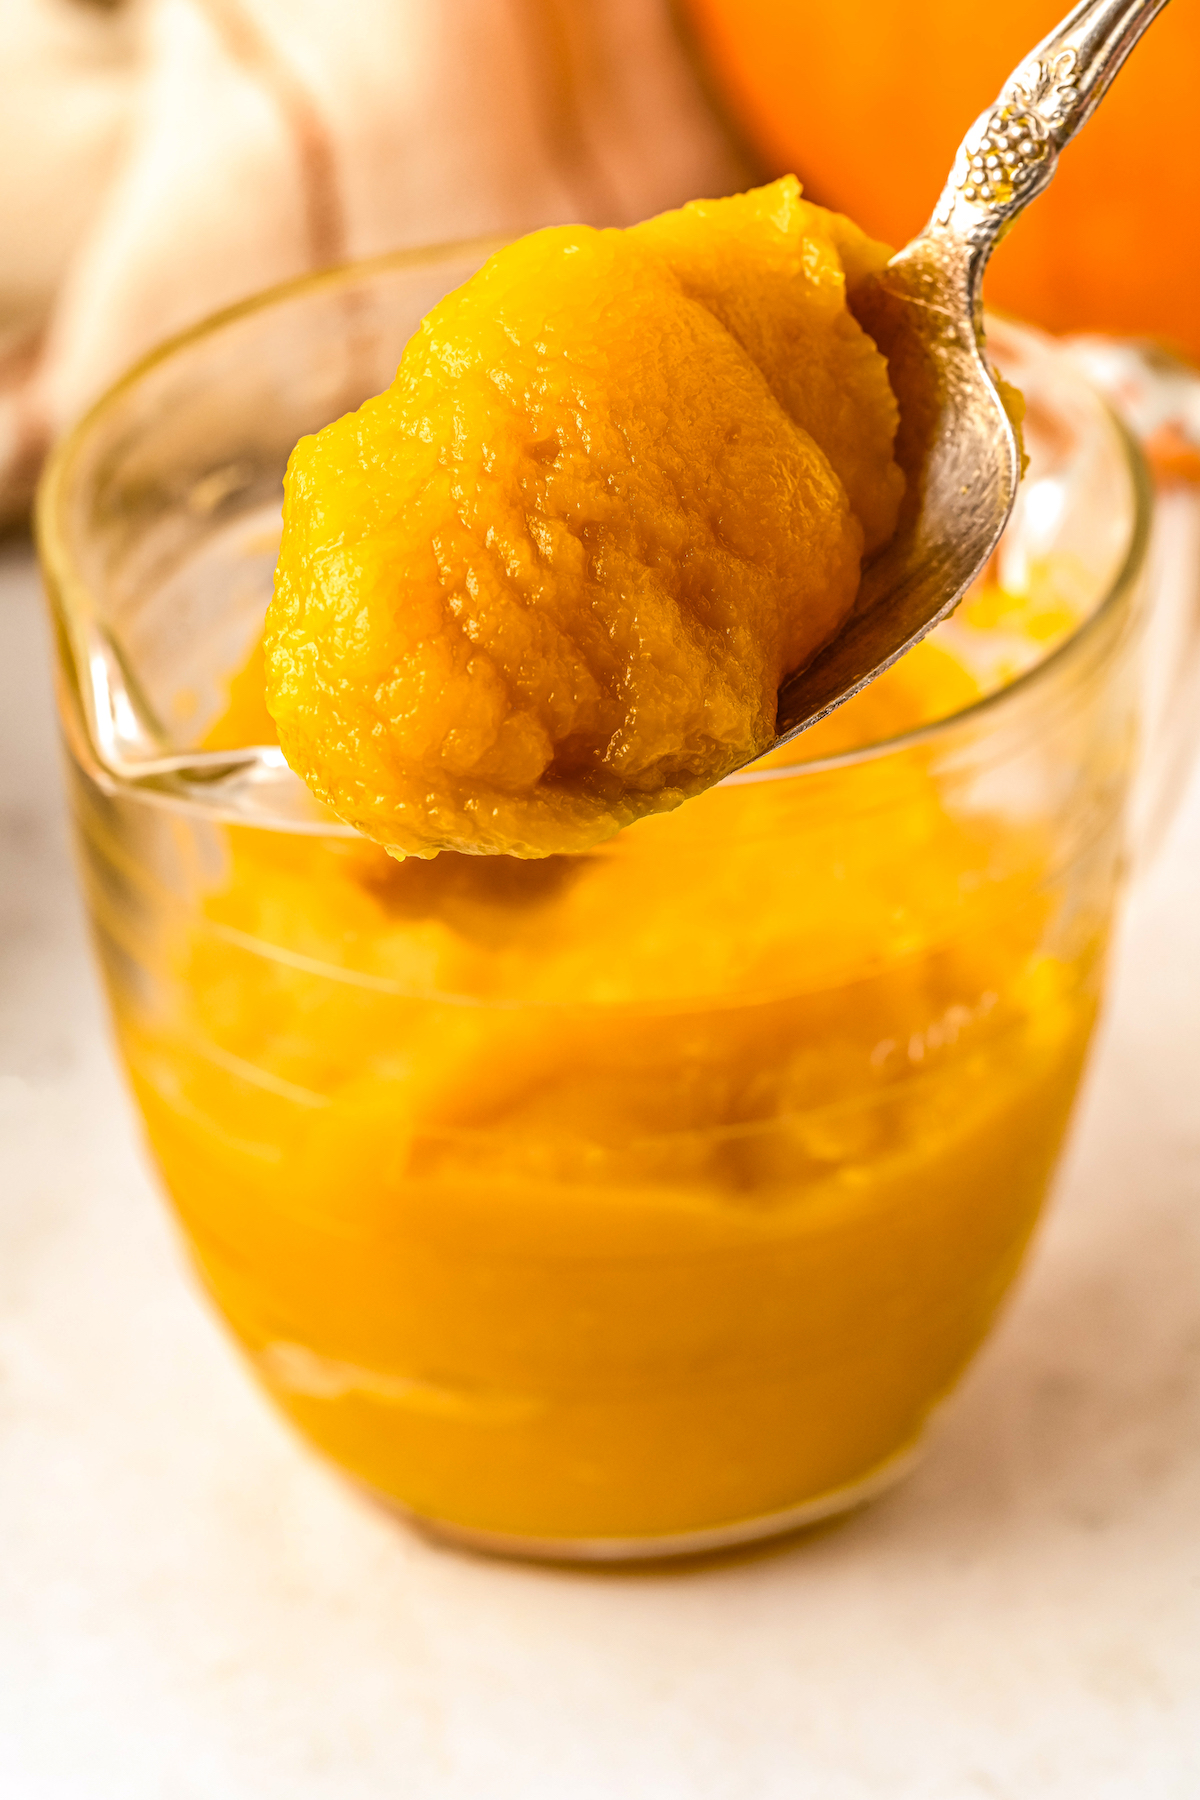 Lifting a spoon of pumpkin puree from a container.